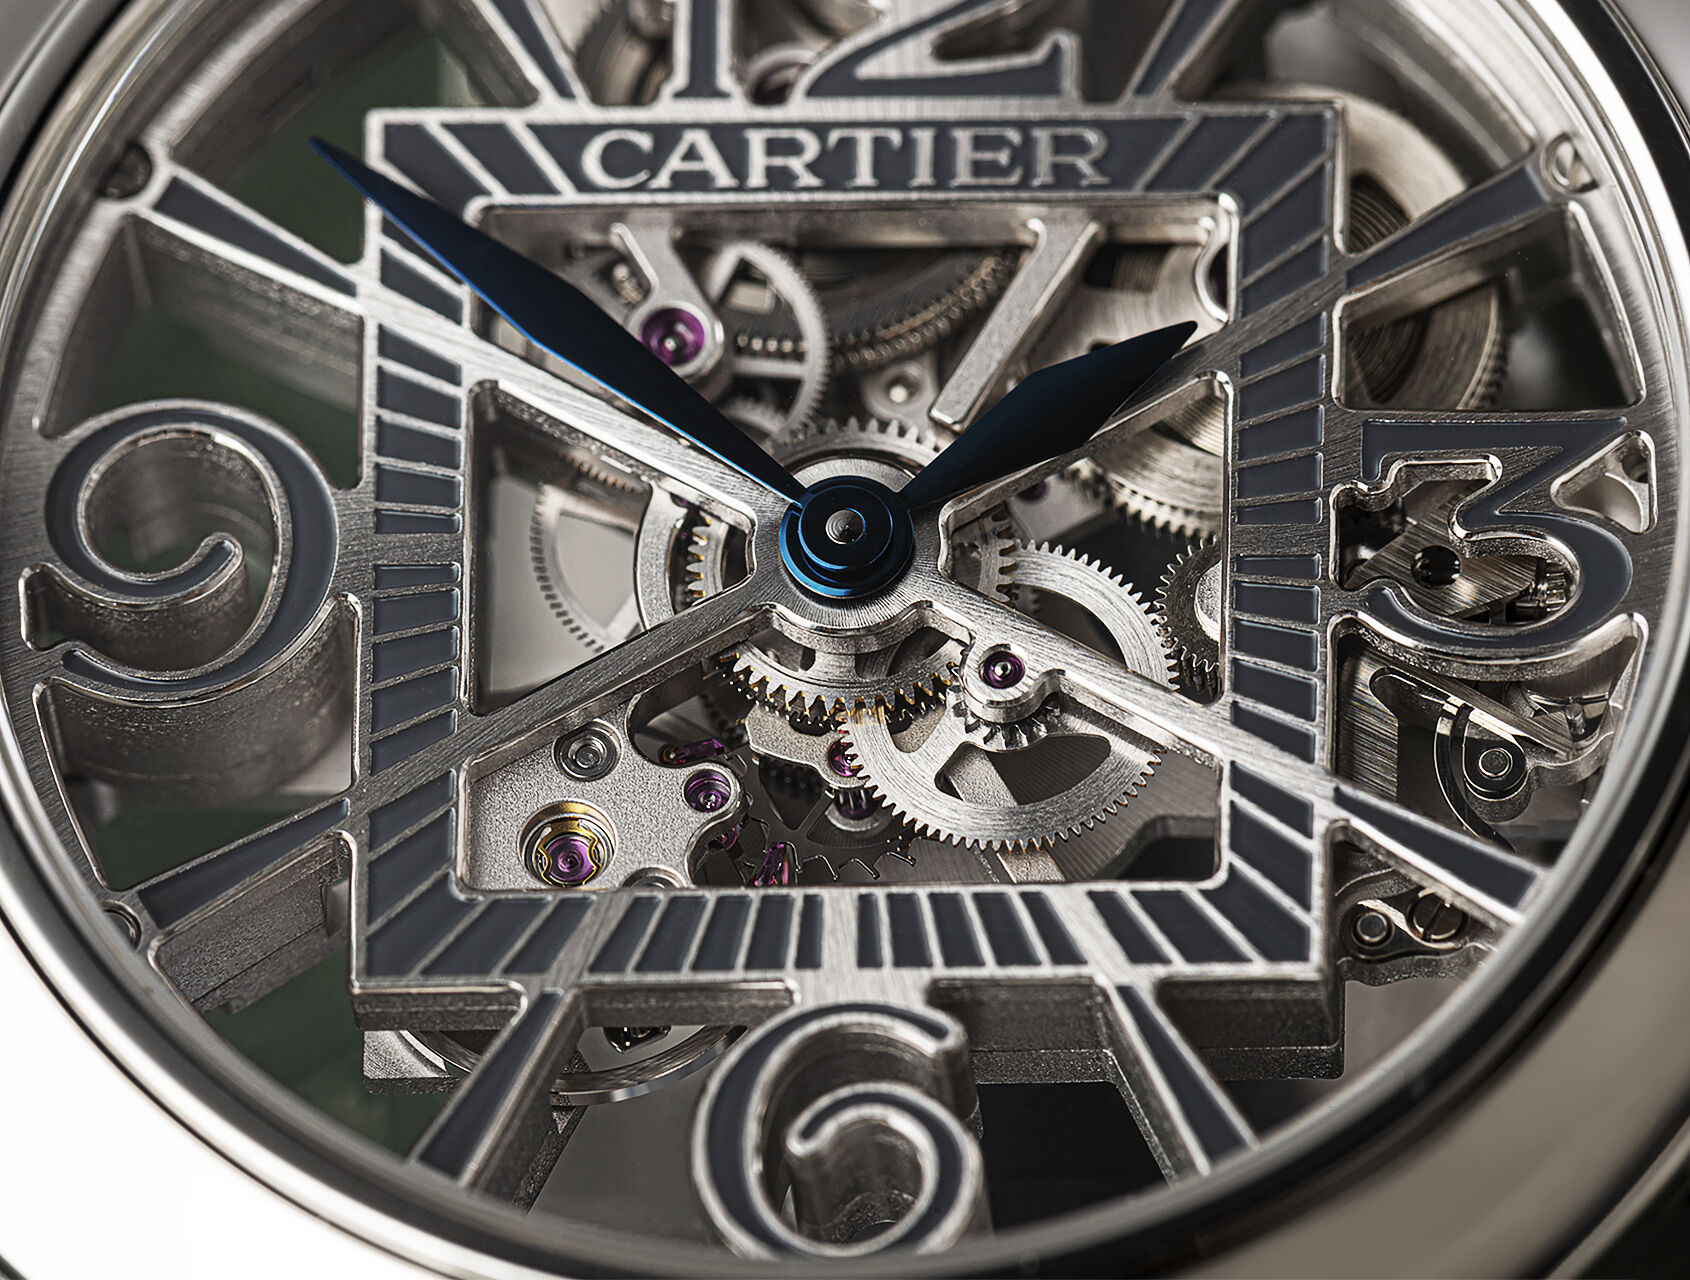 ref WHPA0007 | WHPA0007 - Skeleton Dial | Cartier Pasha 